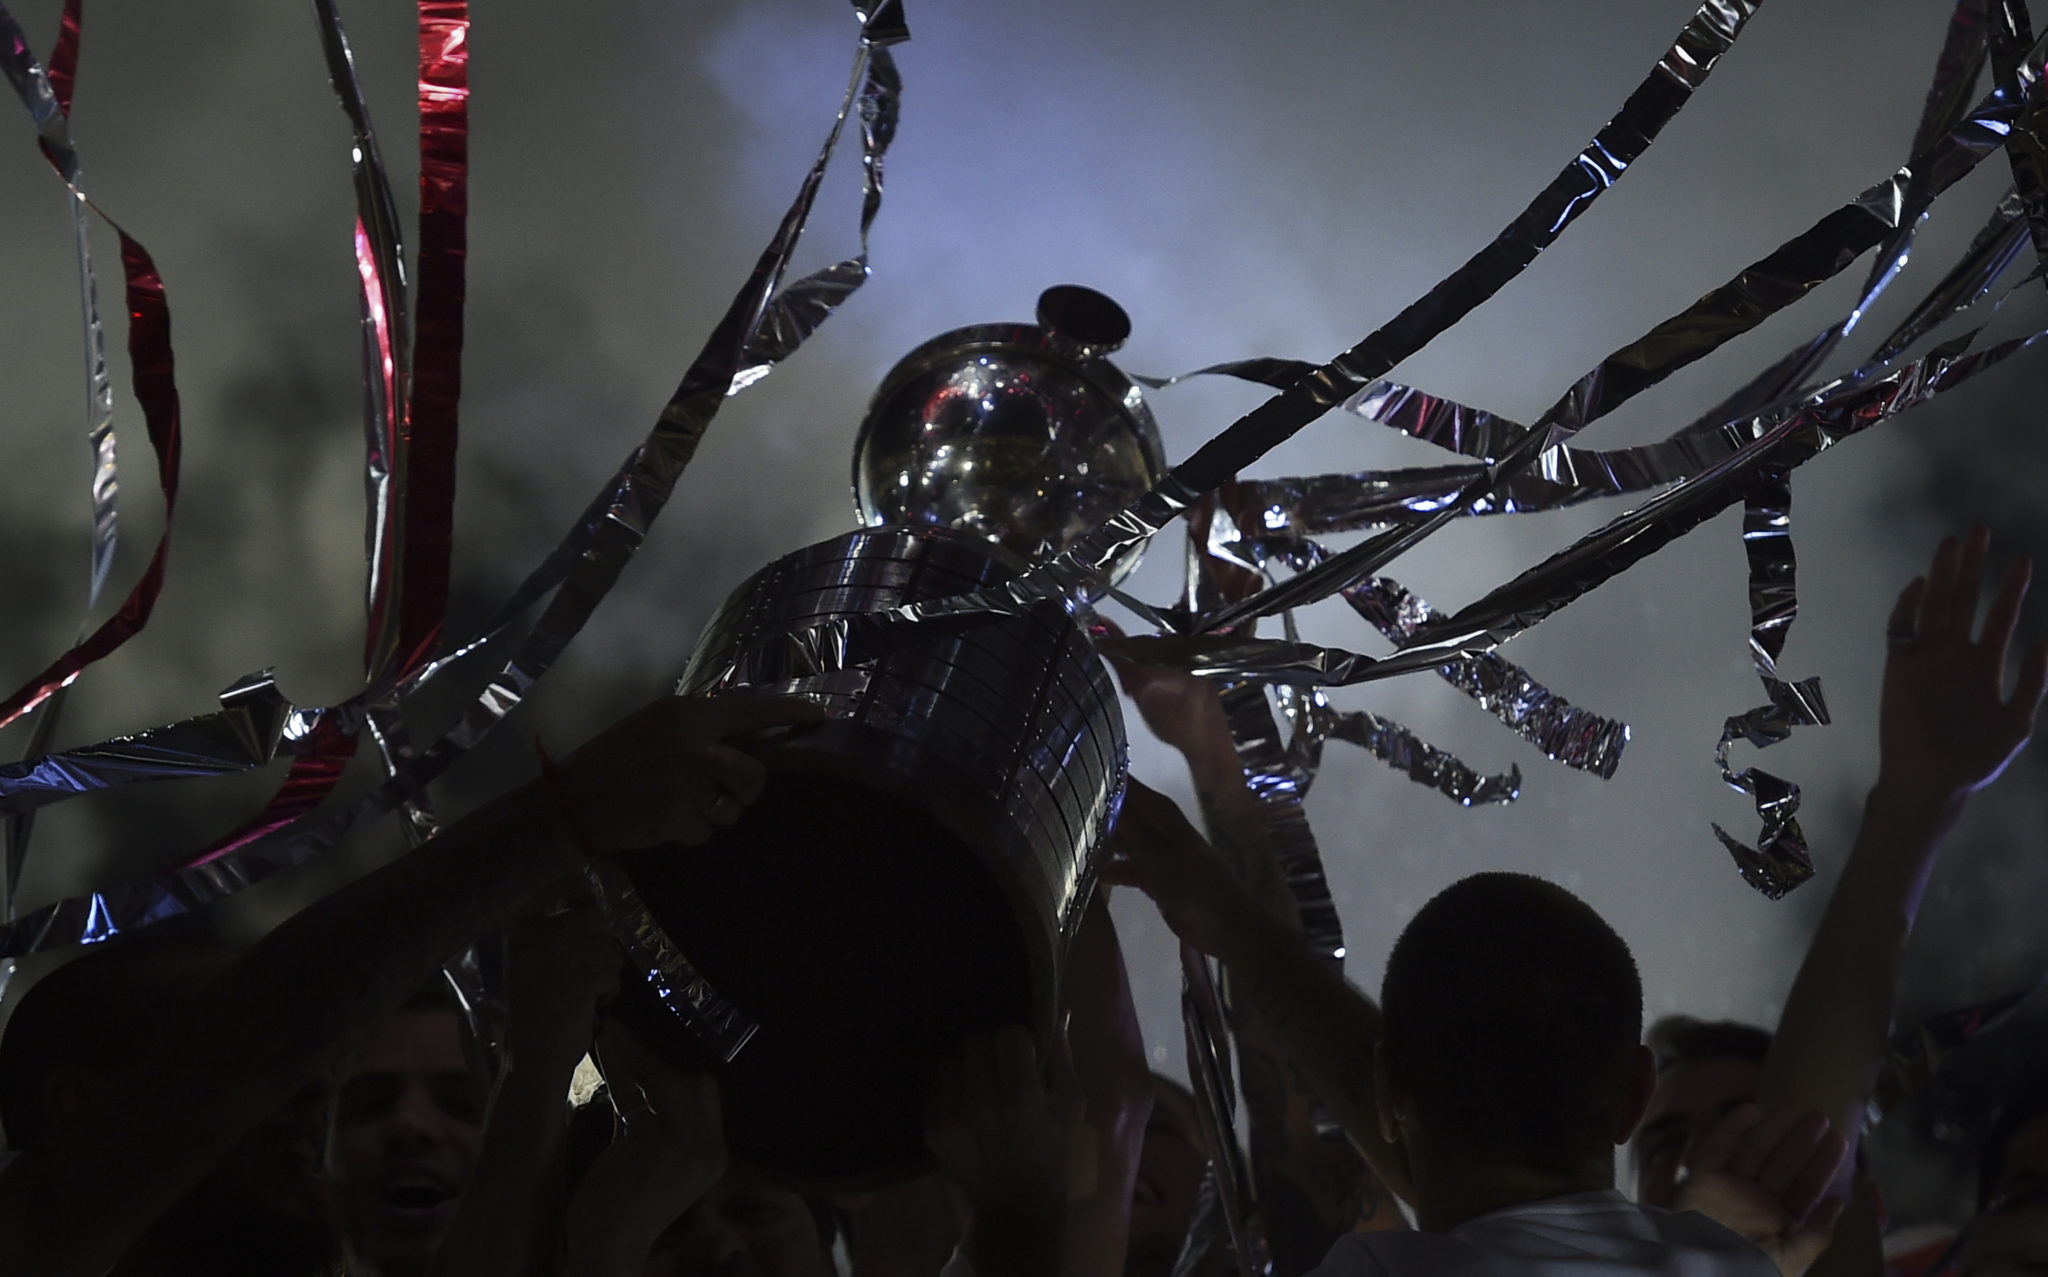 BUENOS AIRES, ARGENTINA - DECEMBER 23: Players of River Plate lift the Copa CONMEBOL Libertadores trophy during the celebrations at Antonio Vespucio Liberti Stadium after winning the Copa CONMEBOL Libertadores Final against Boca Juniors on December 23, 2018 in Buenos Aires, Argentina.  (Photo by Marcelo Endelli/Getty Images)